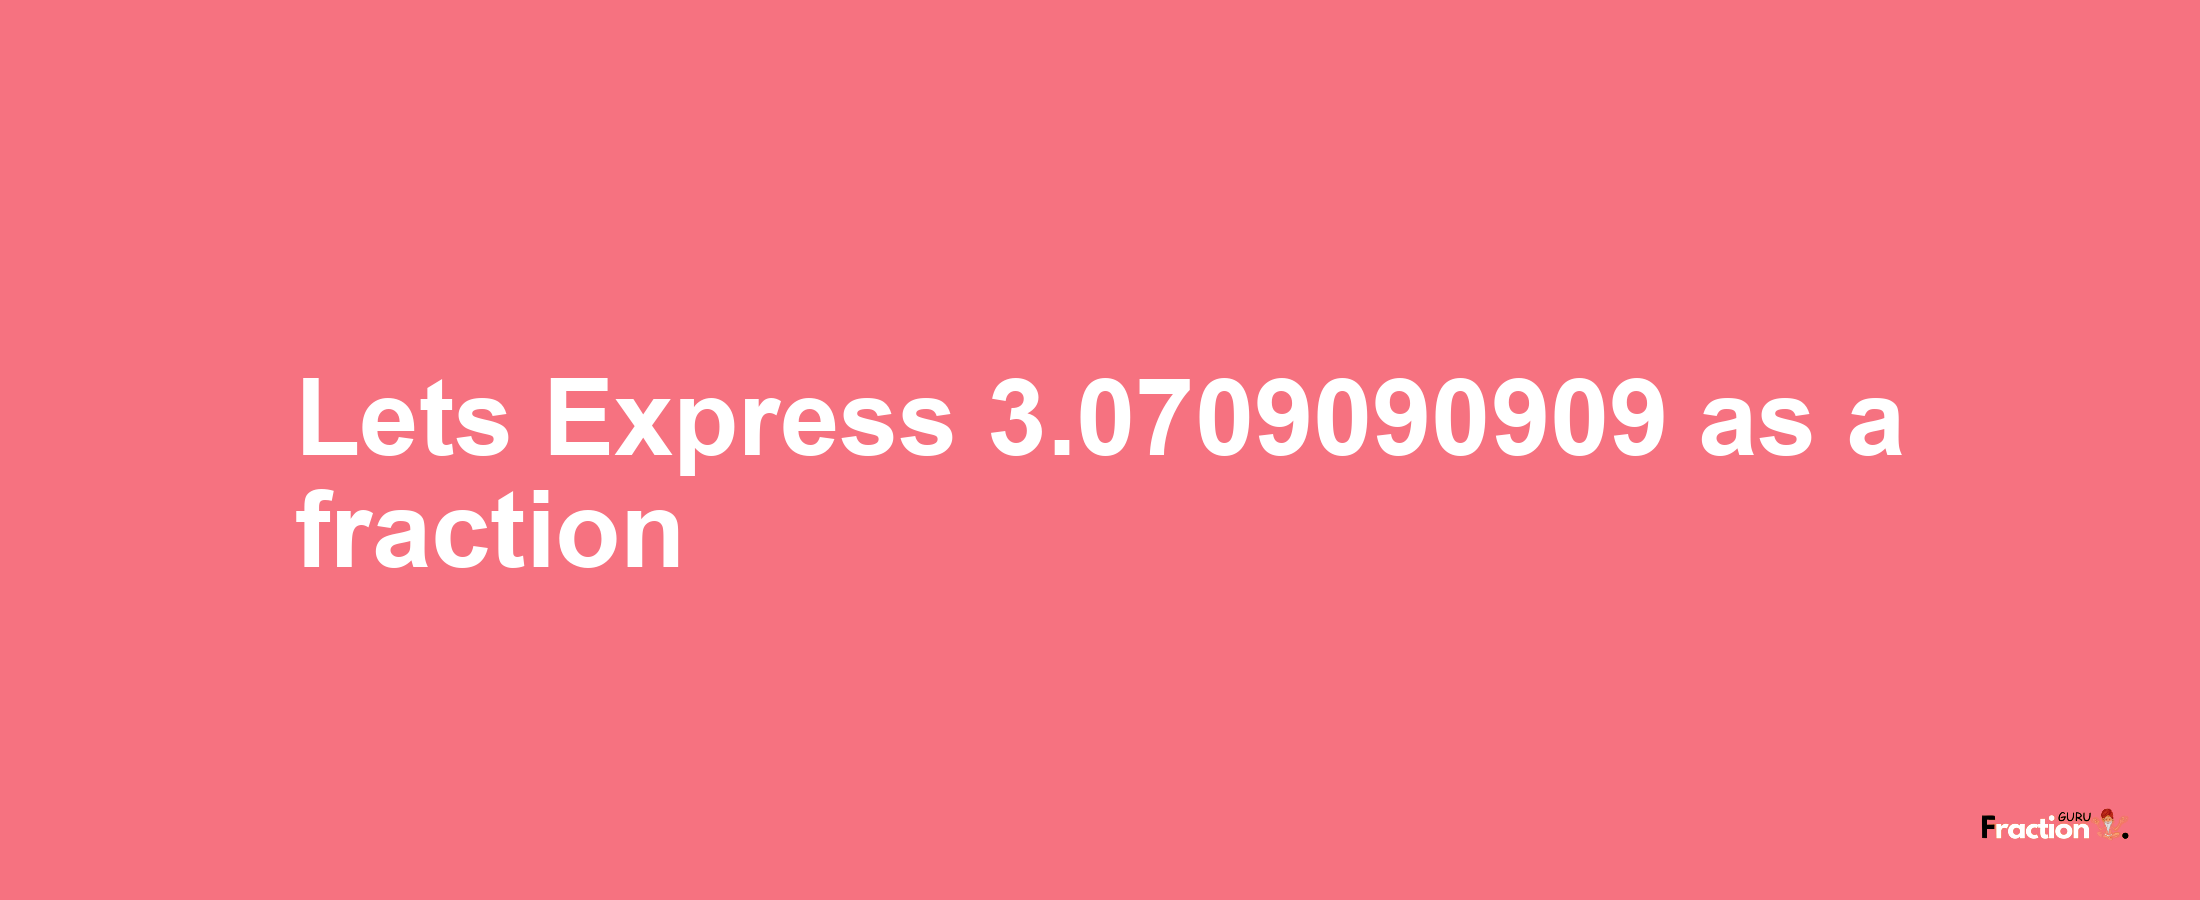 Lets Express 3.0709090909 as afraction